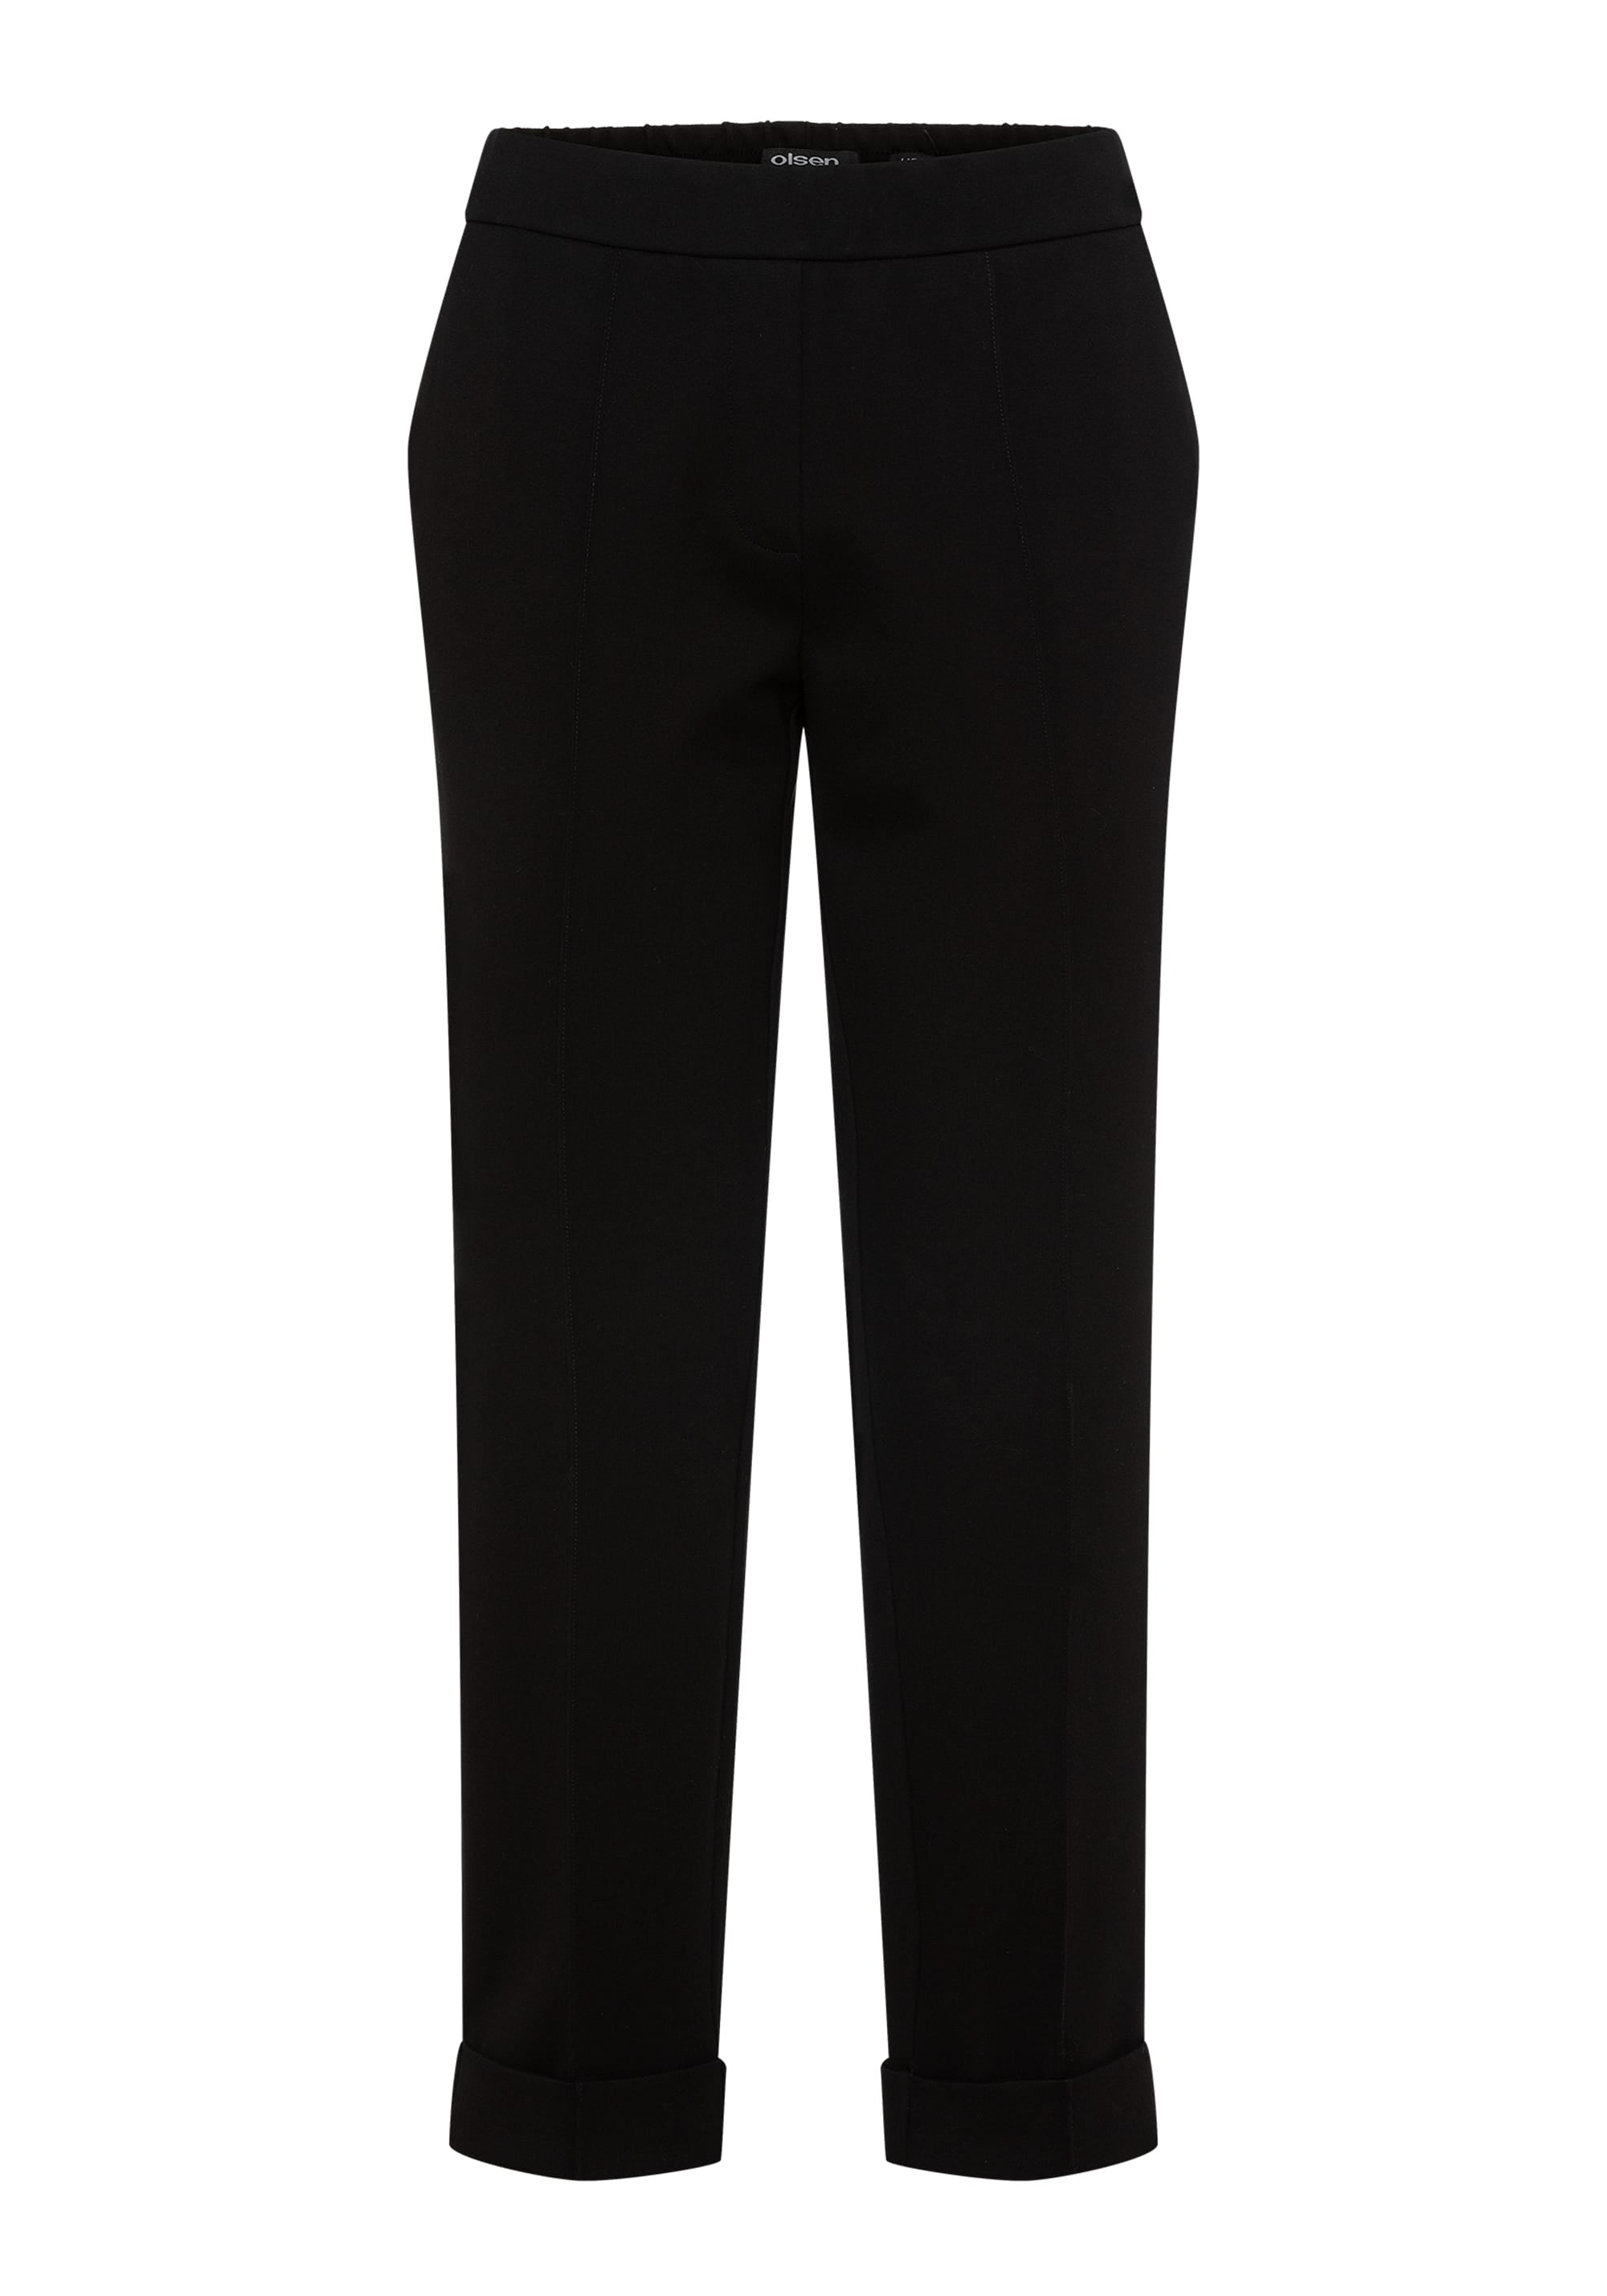 Colleen Lopez Crossover Waist Knit Pant